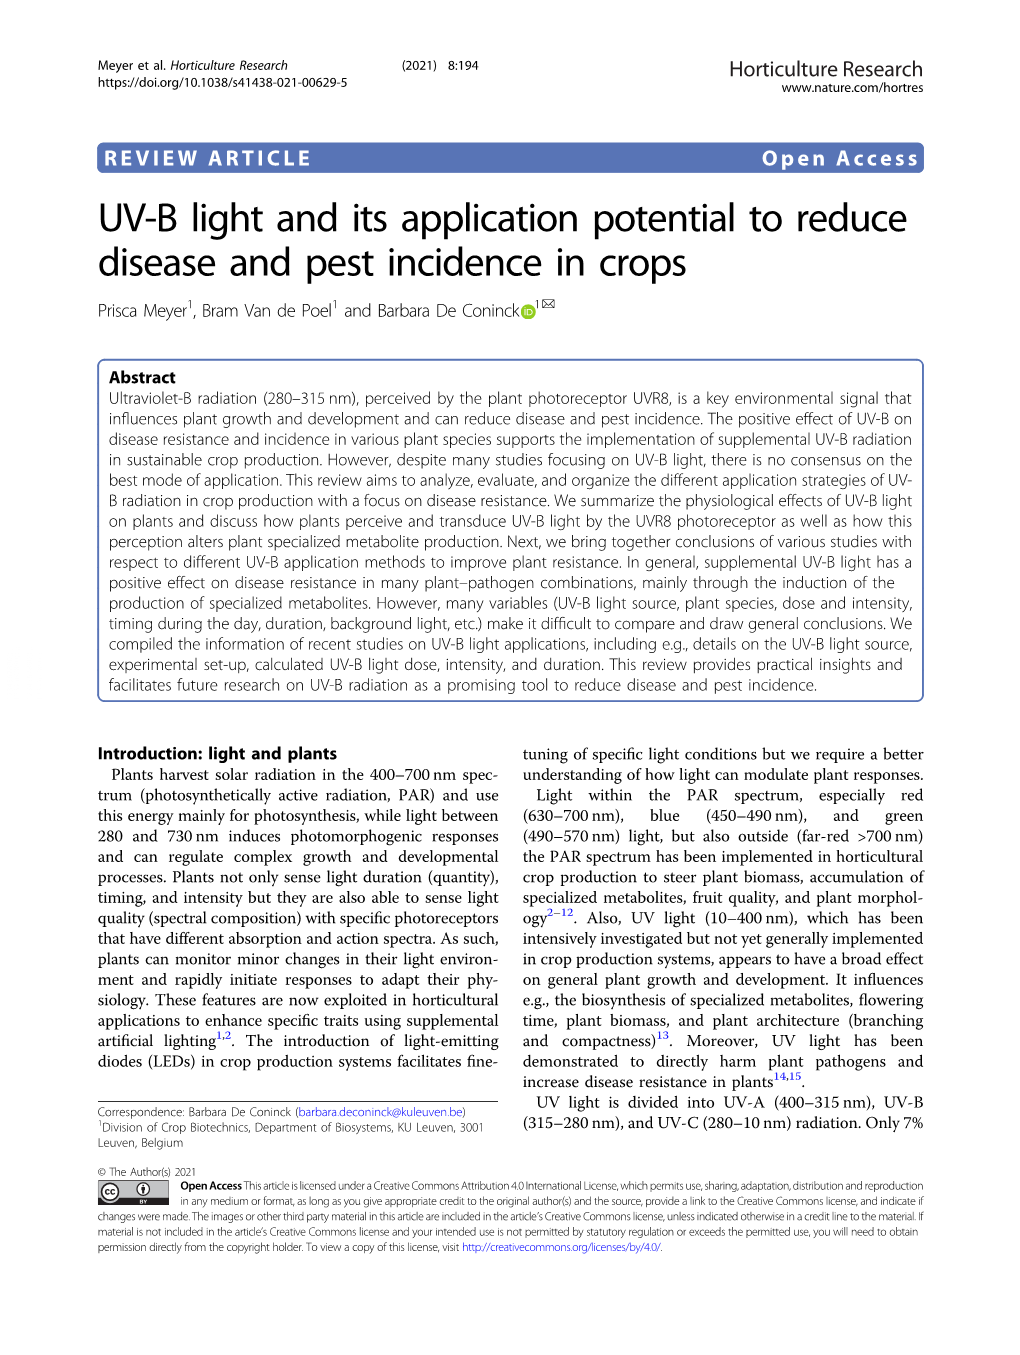 UV-B Light and Its Application Potential to Reduce Disease and Pest Incidence in Crops ✉ Prisca Meyer1, Bram Van De Poel1 and Barbara De Coninck 1